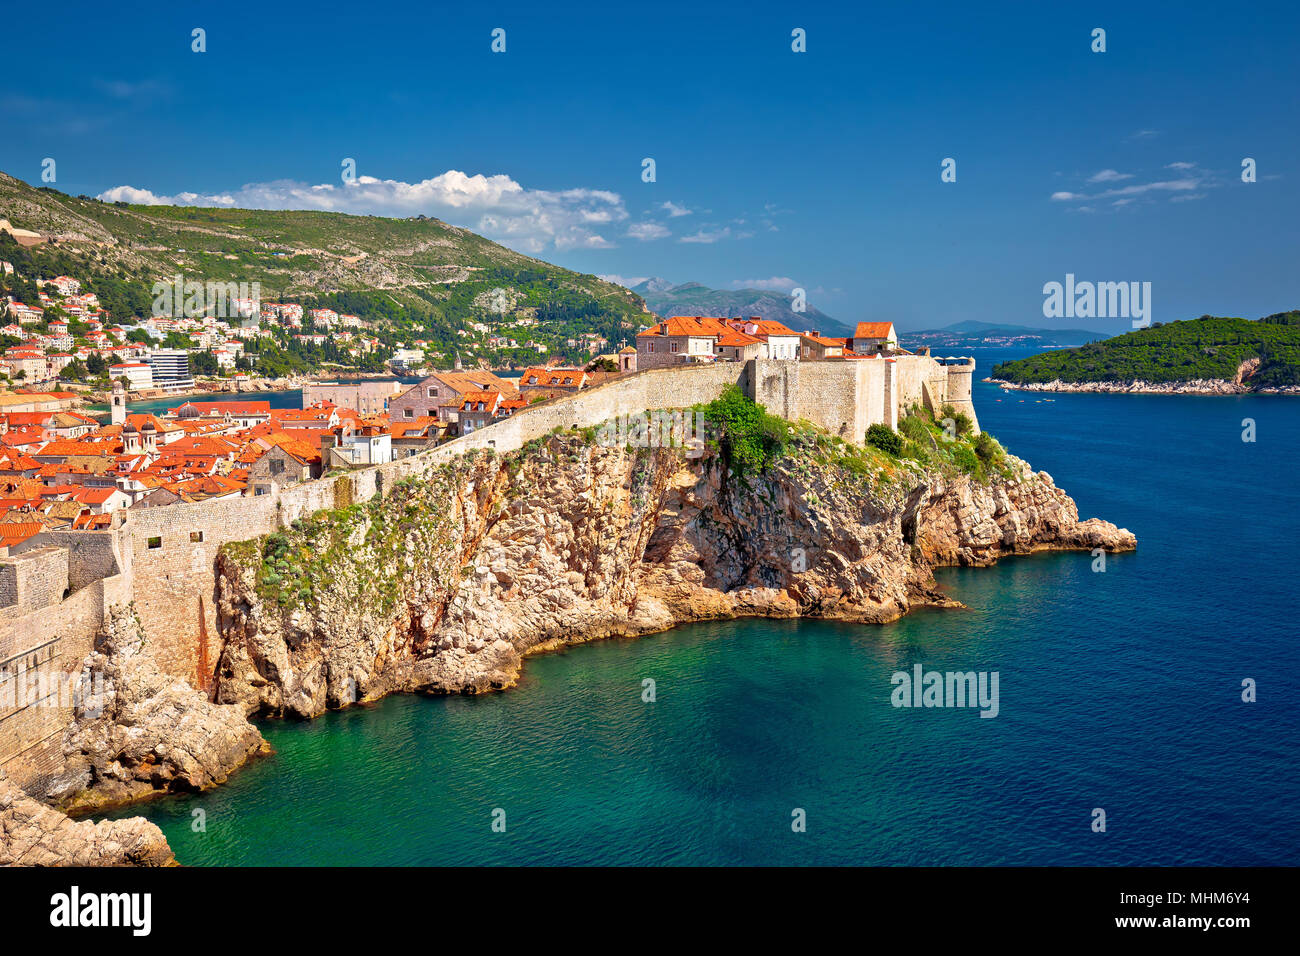 Town of Dubrovnik and stron defence walls view, Dalmatia region of Croatia Stock Photo